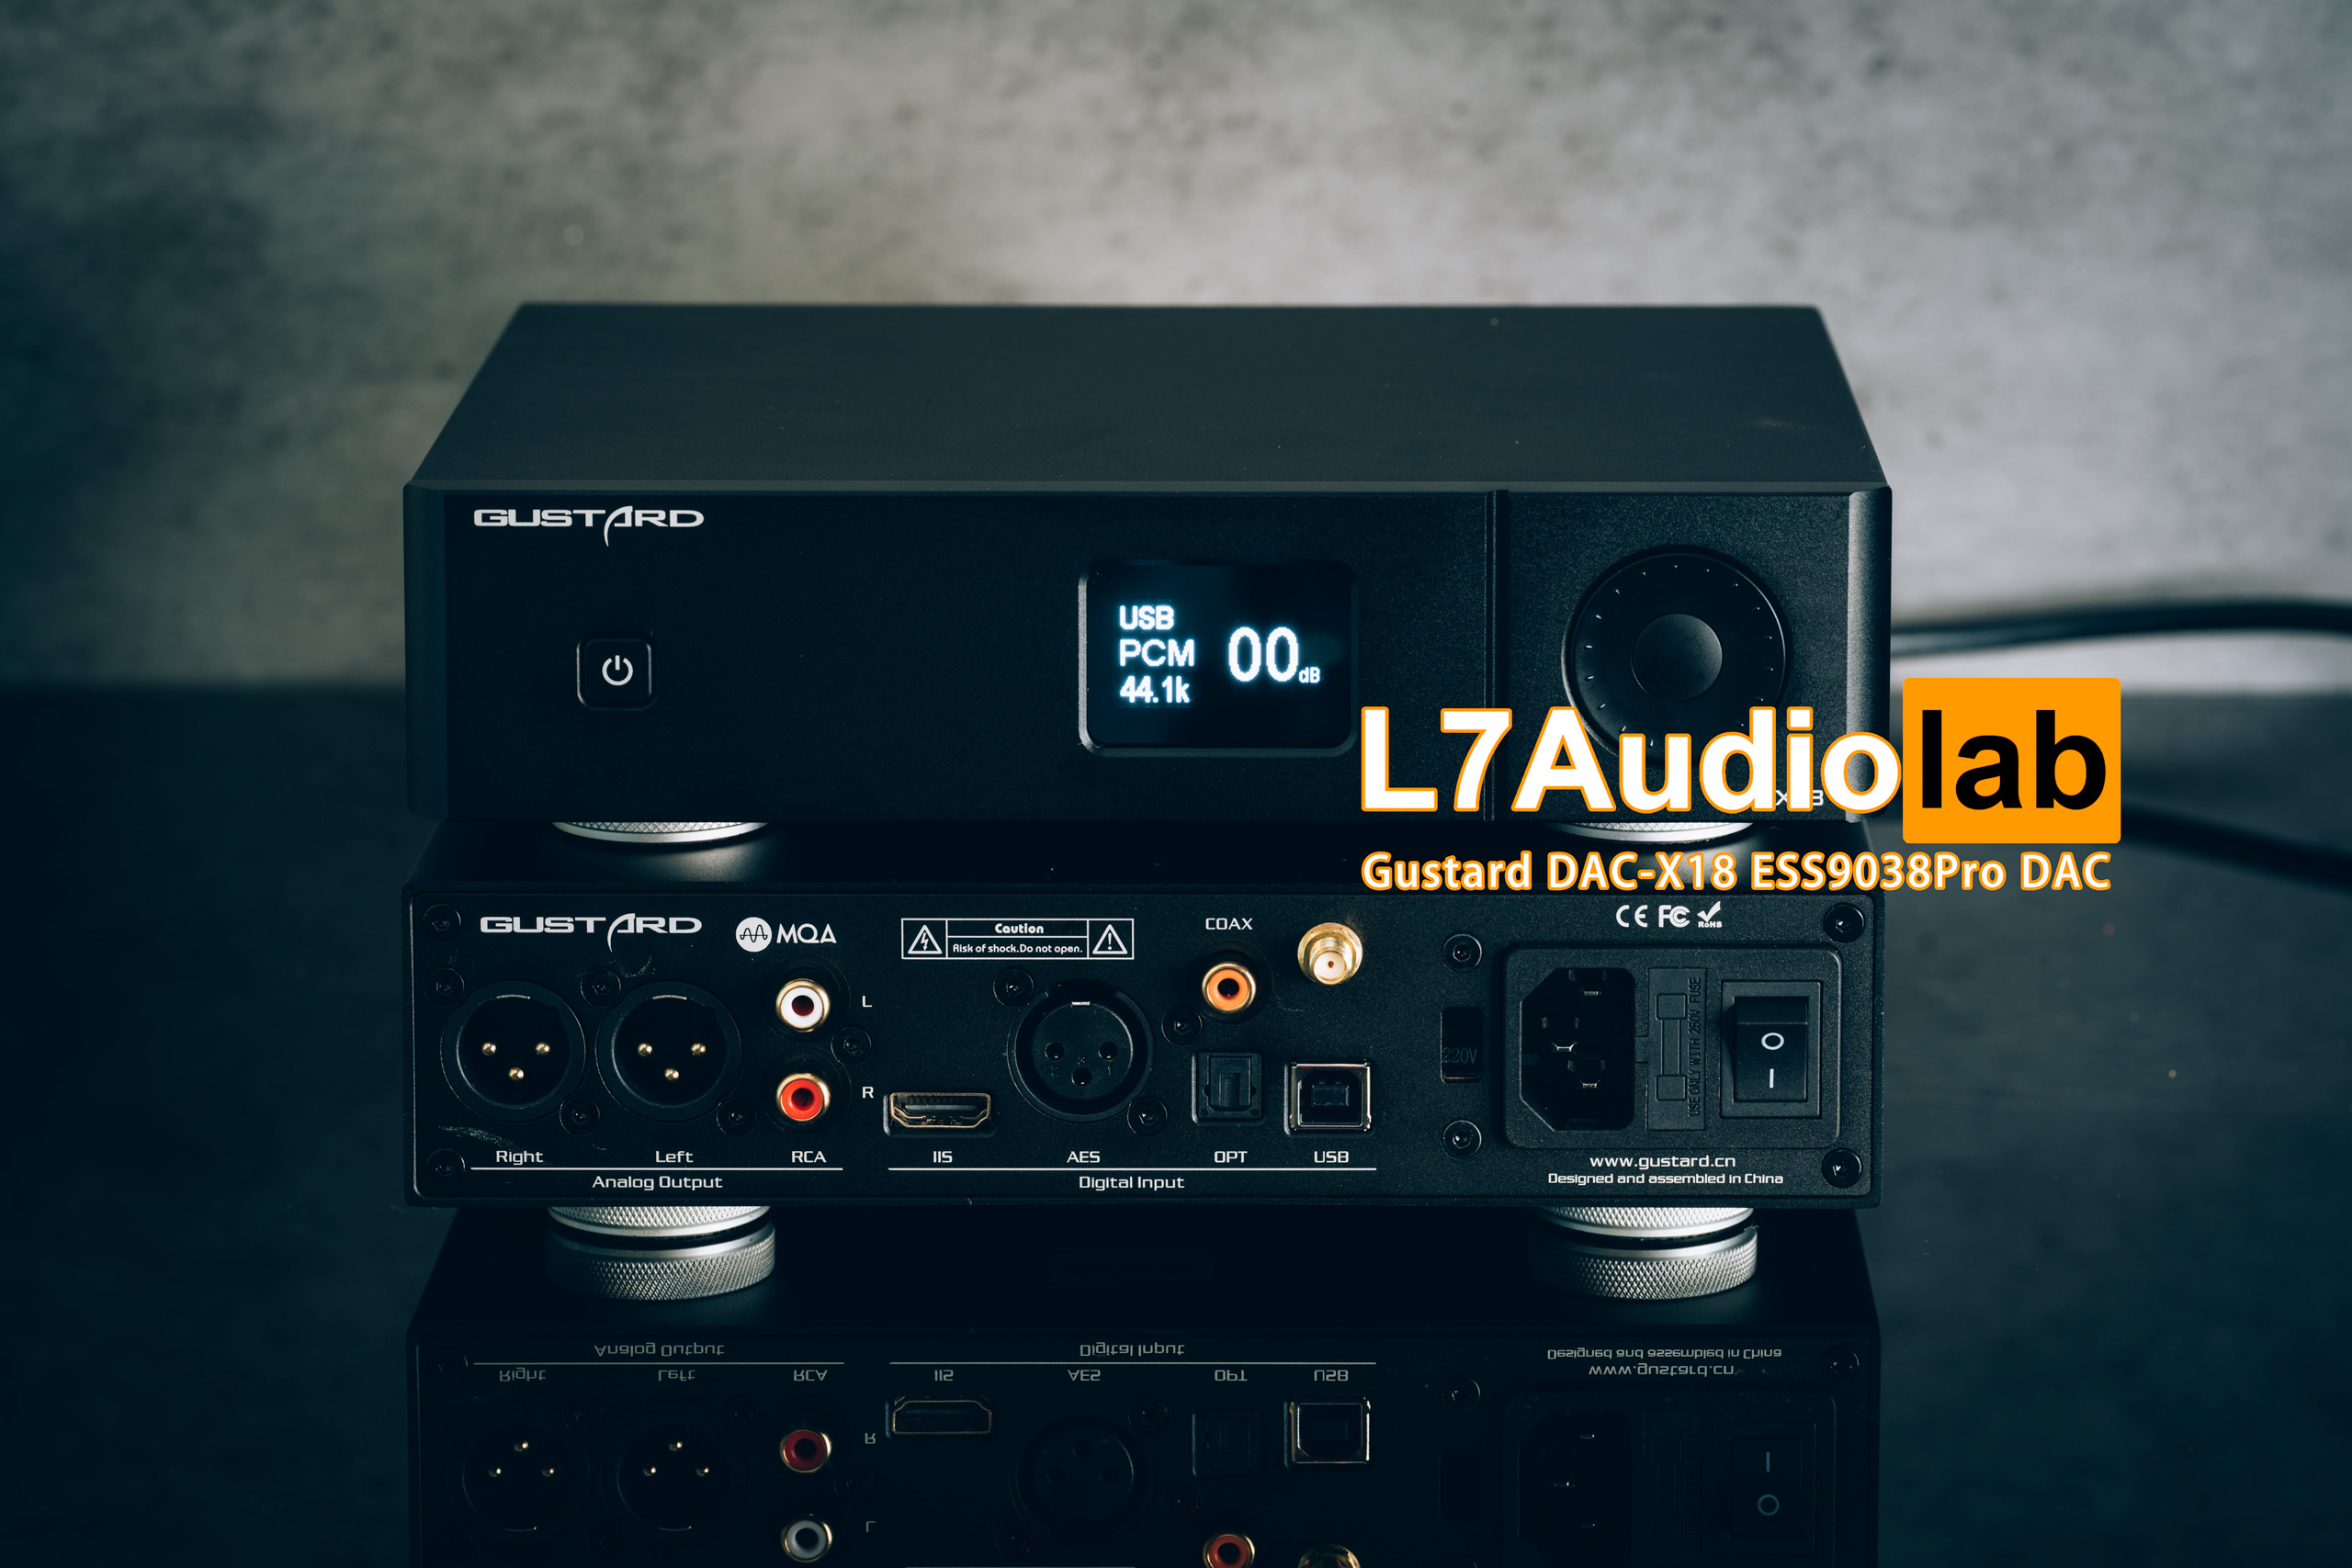 Measurements & Review of Gustard DAC-X18 - L7Audiolab